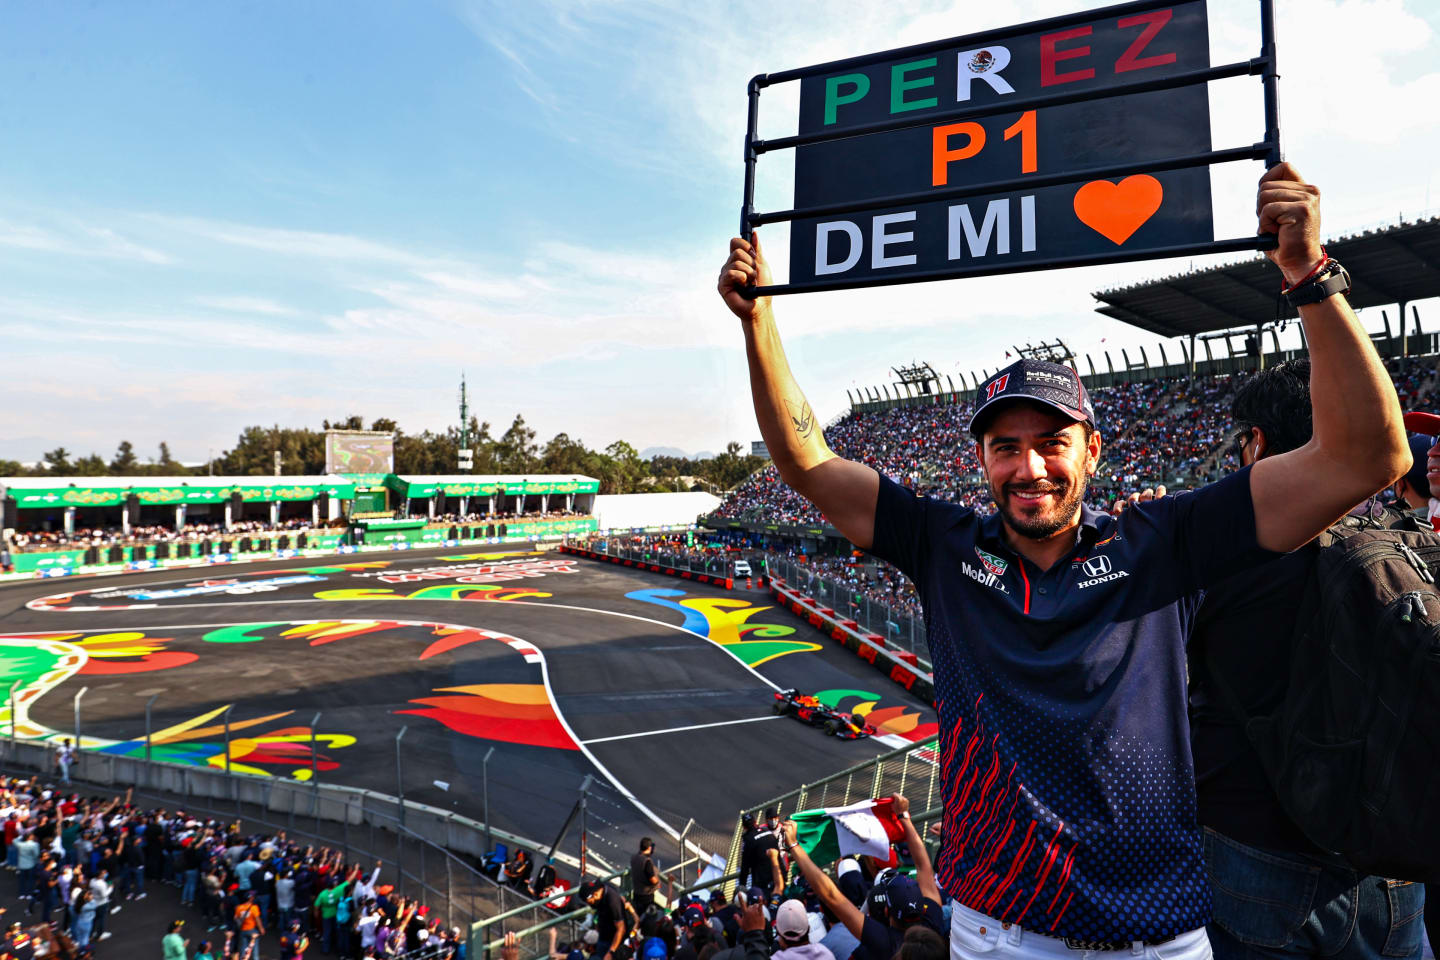 MEXICO CITY, MEXICO - NOVEMBER 05: A Sergio Perez of Mexico and Red Bull Racing fan shows their